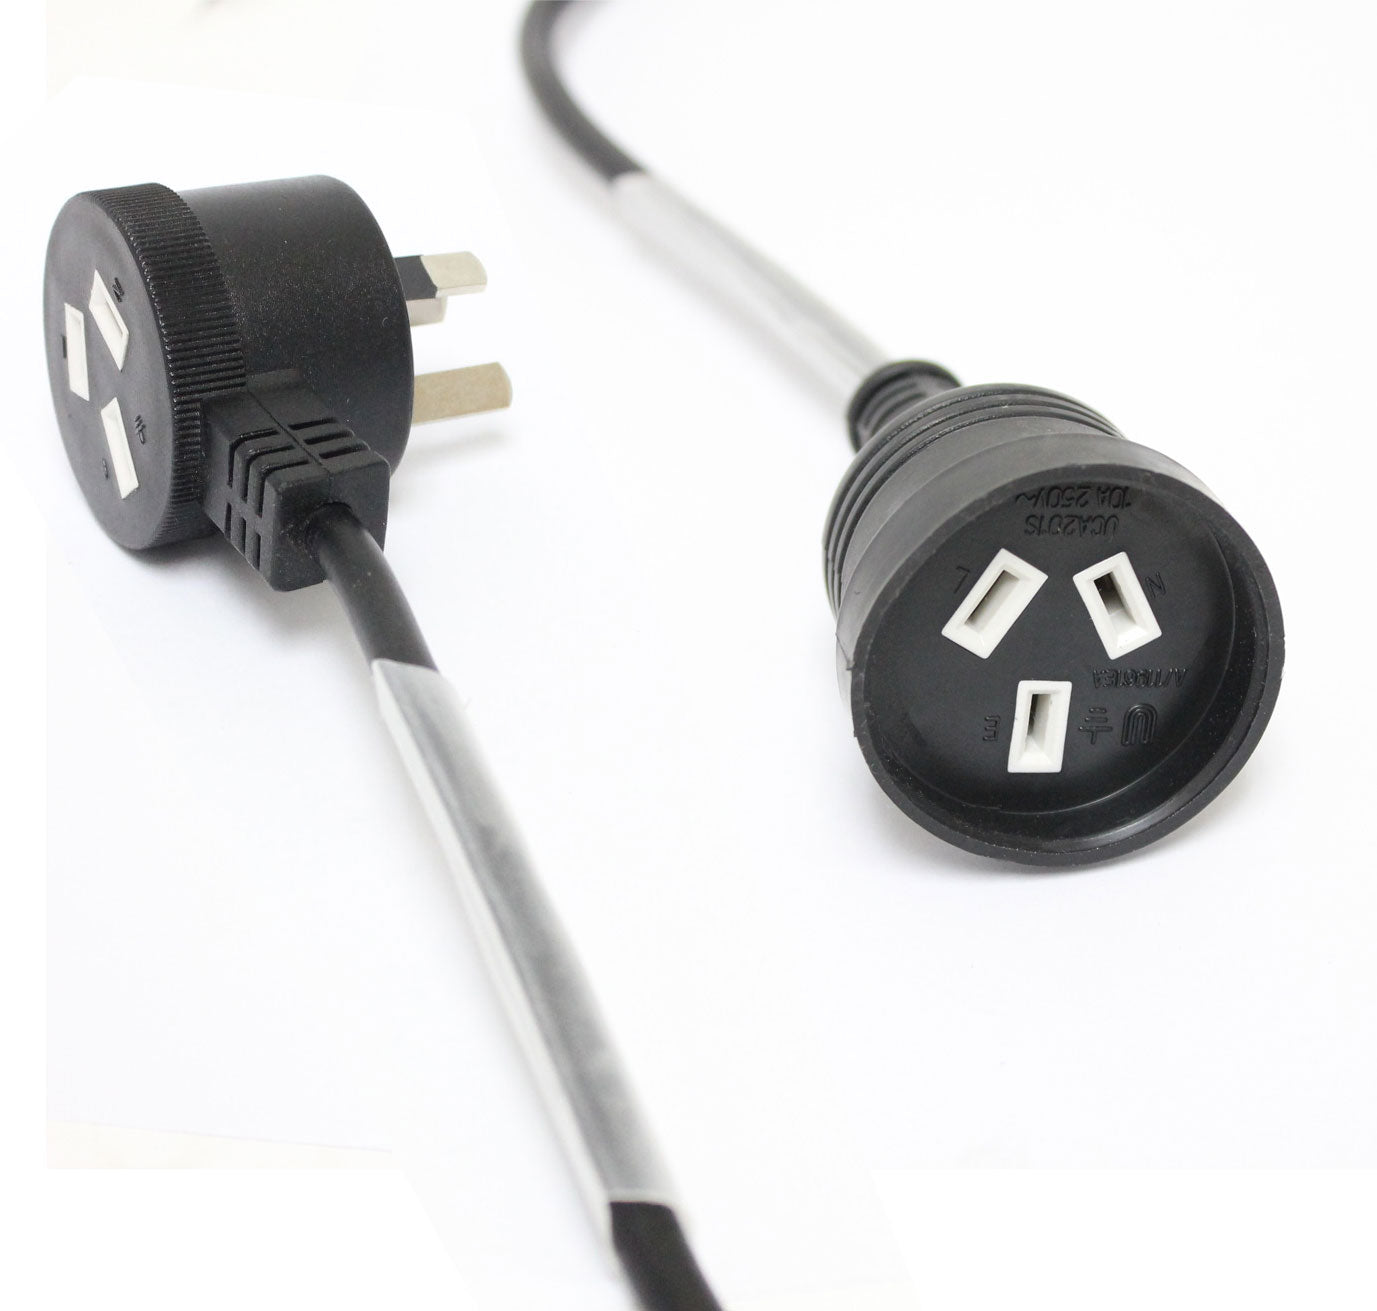 Power Extension Cable